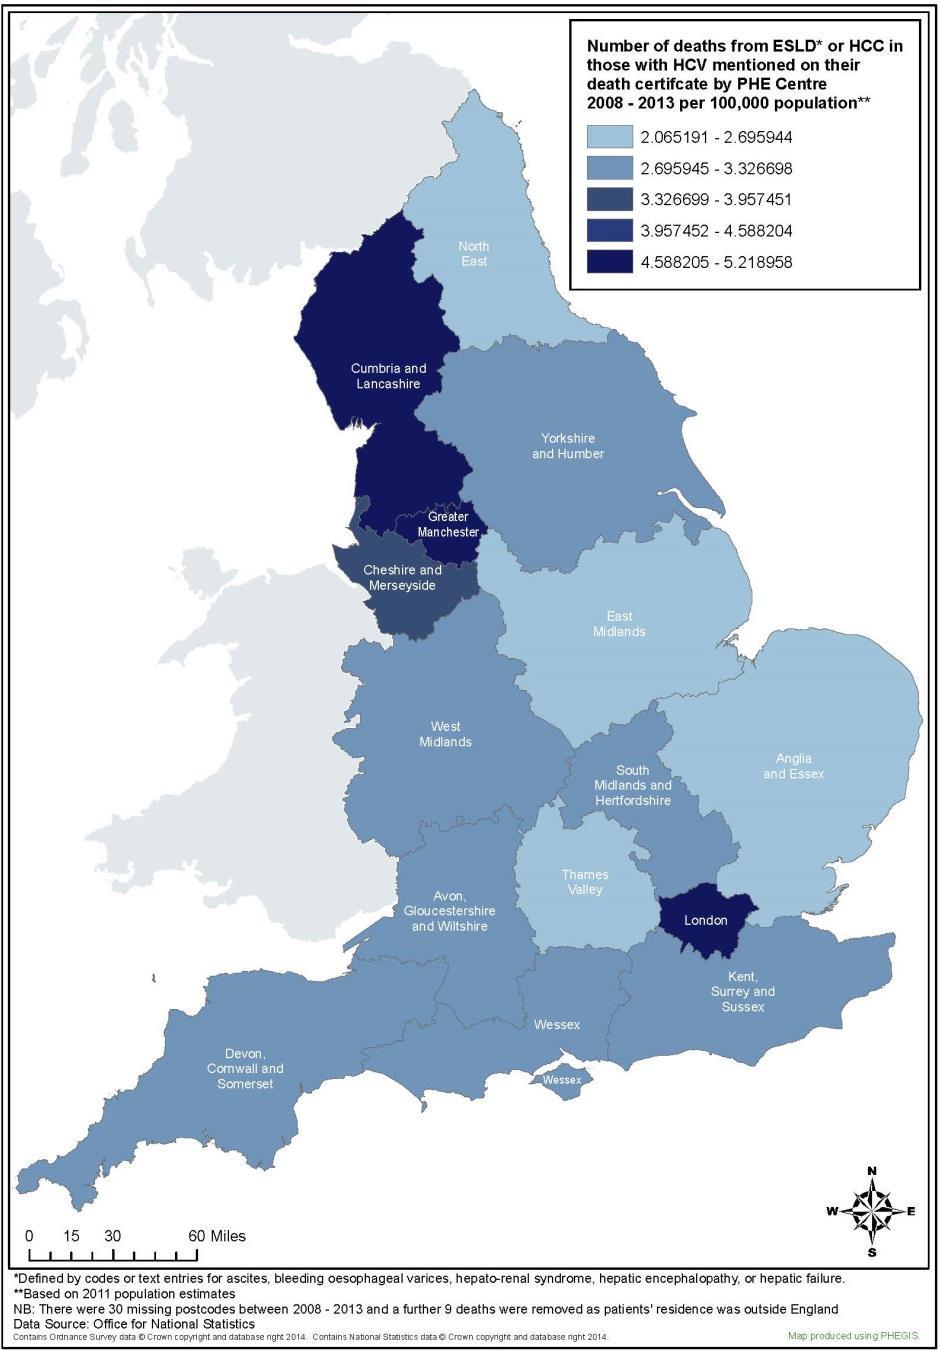 Figure 10 shows that along with London, Greater Manchester has the highest rate of death from end stage liver disease or hepatocellular carcinoma.